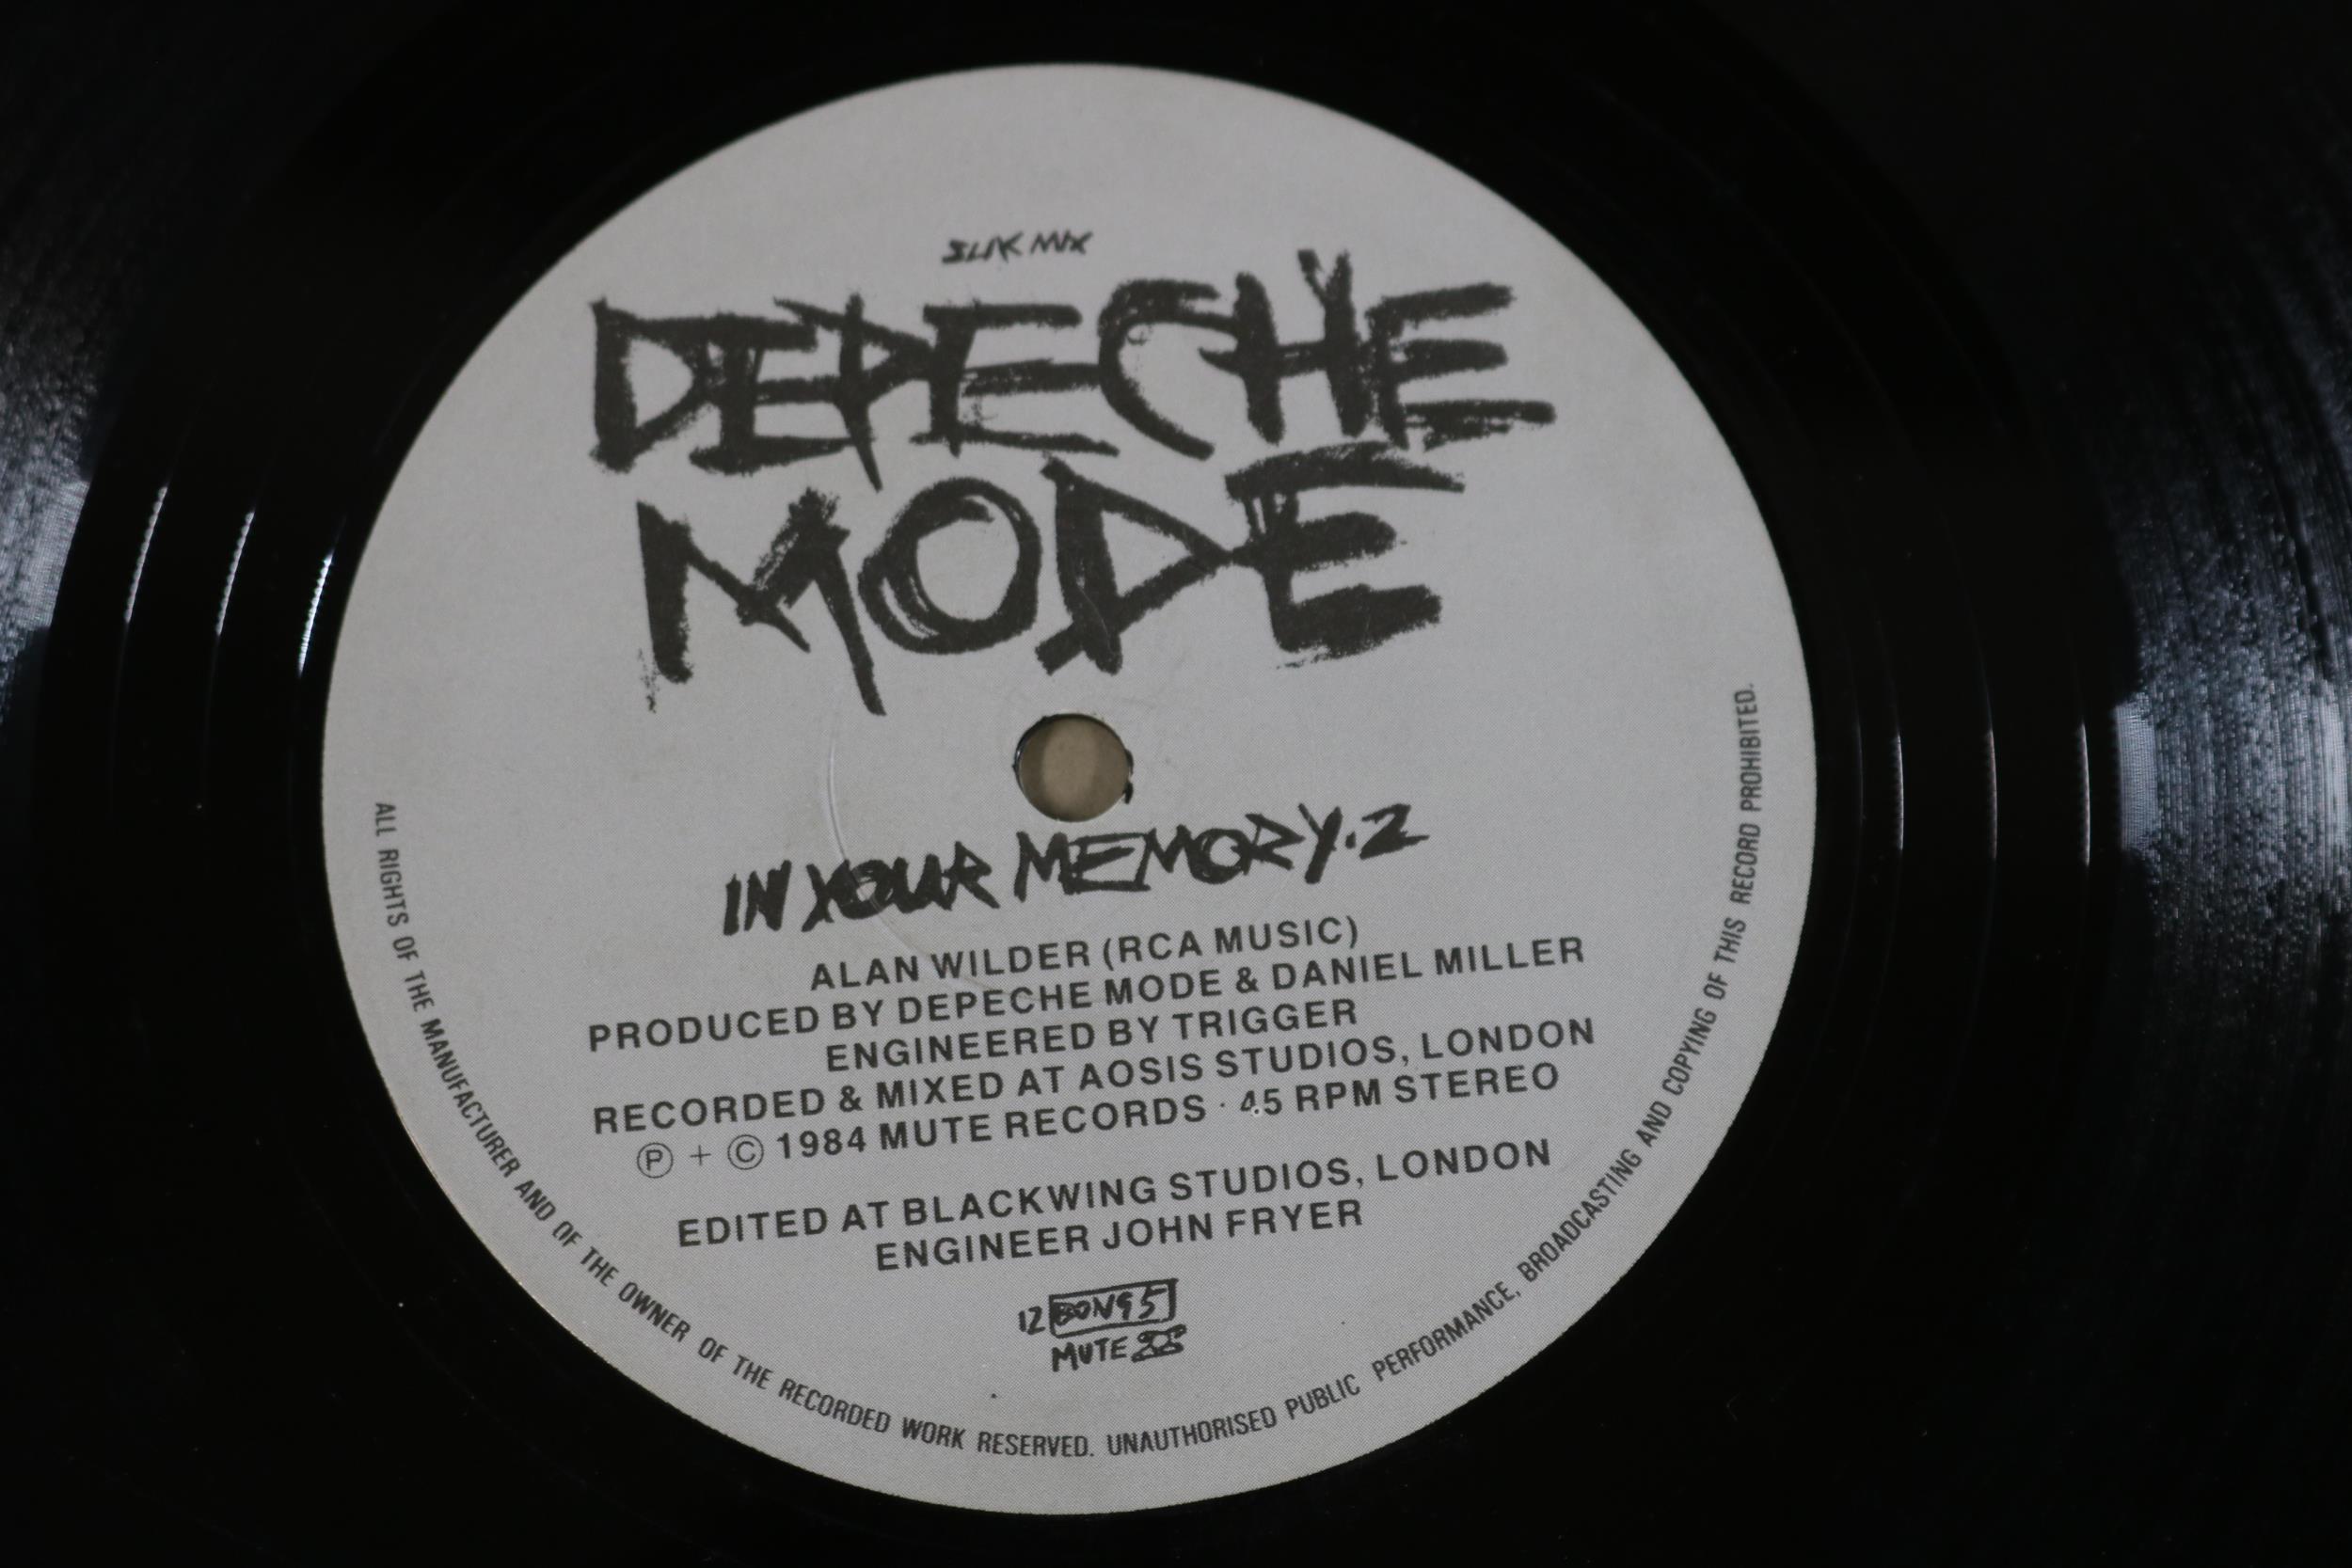 Small Collection of 4 Vinyls including Depeche Mode - Image 15 of 17